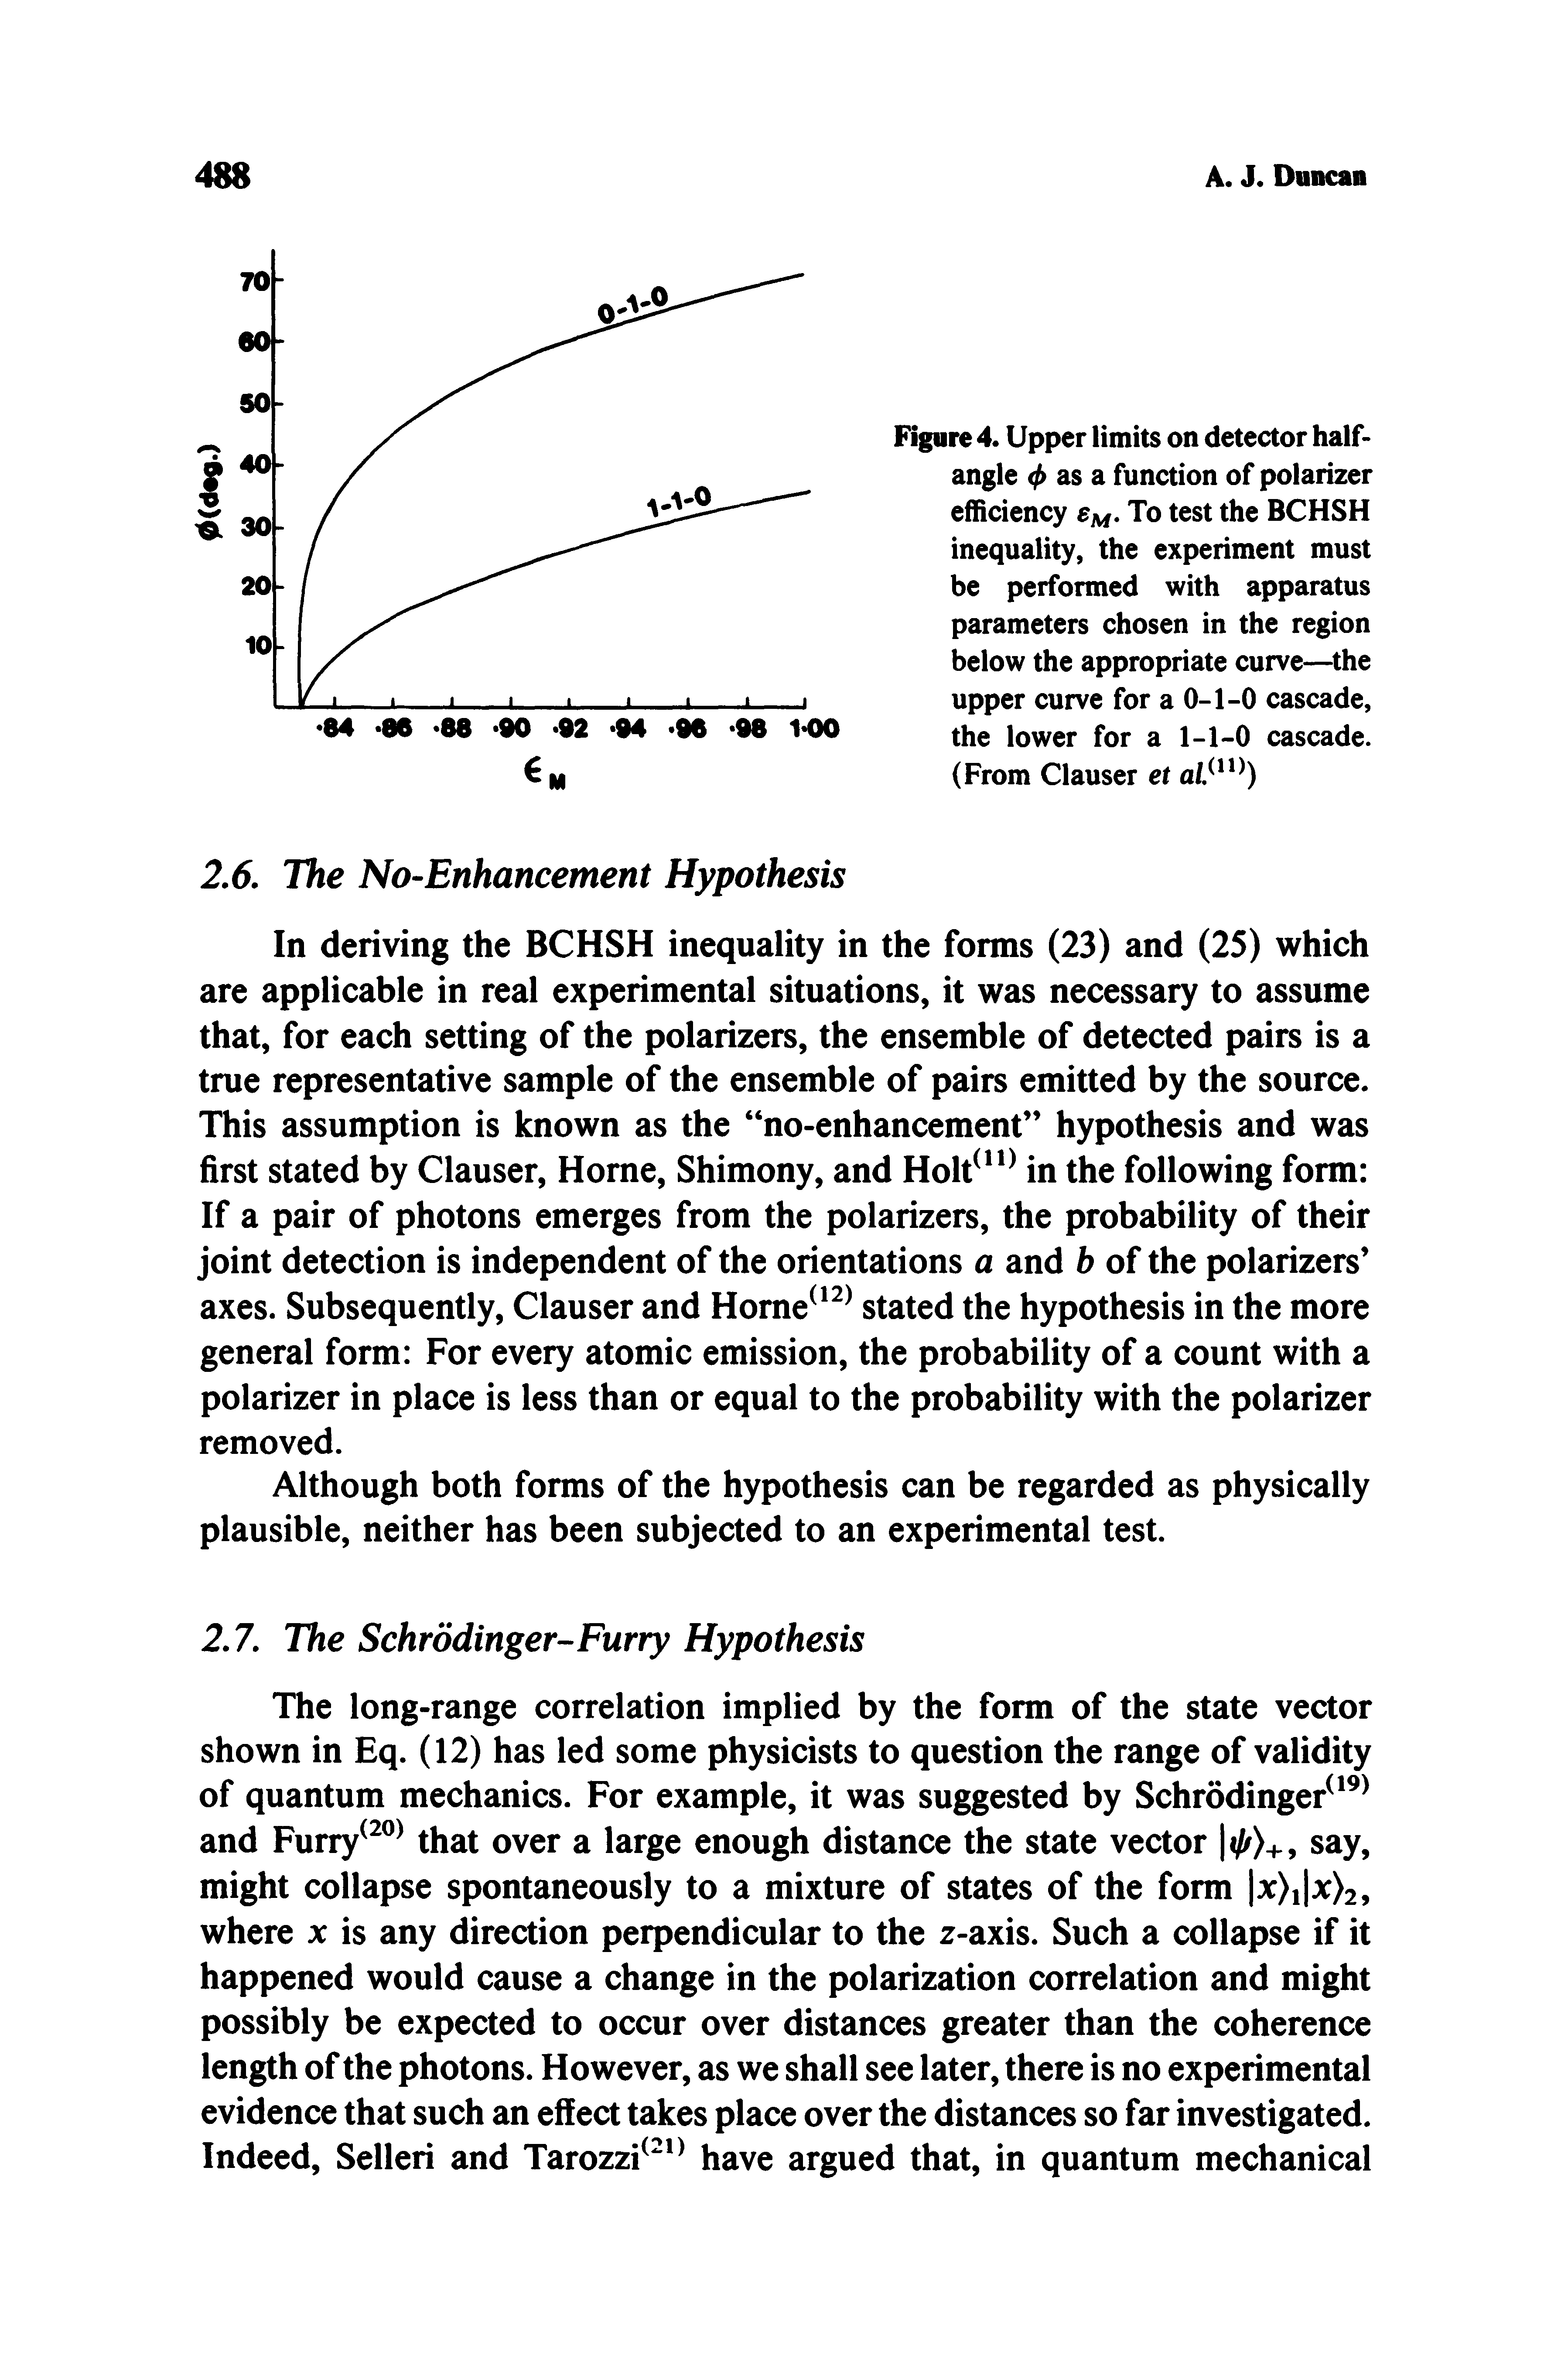 Figure 4. Upper limits on detector half-angle as a function of polarizer efficiency To test the BCHSH inequality, the experiment must be performed with apparatus parameters chosen in the region below the appropriate curve— the upper curve for a 0-1-0 cascade, the lower for a 1-1-0 cascade. (From Clauser et...